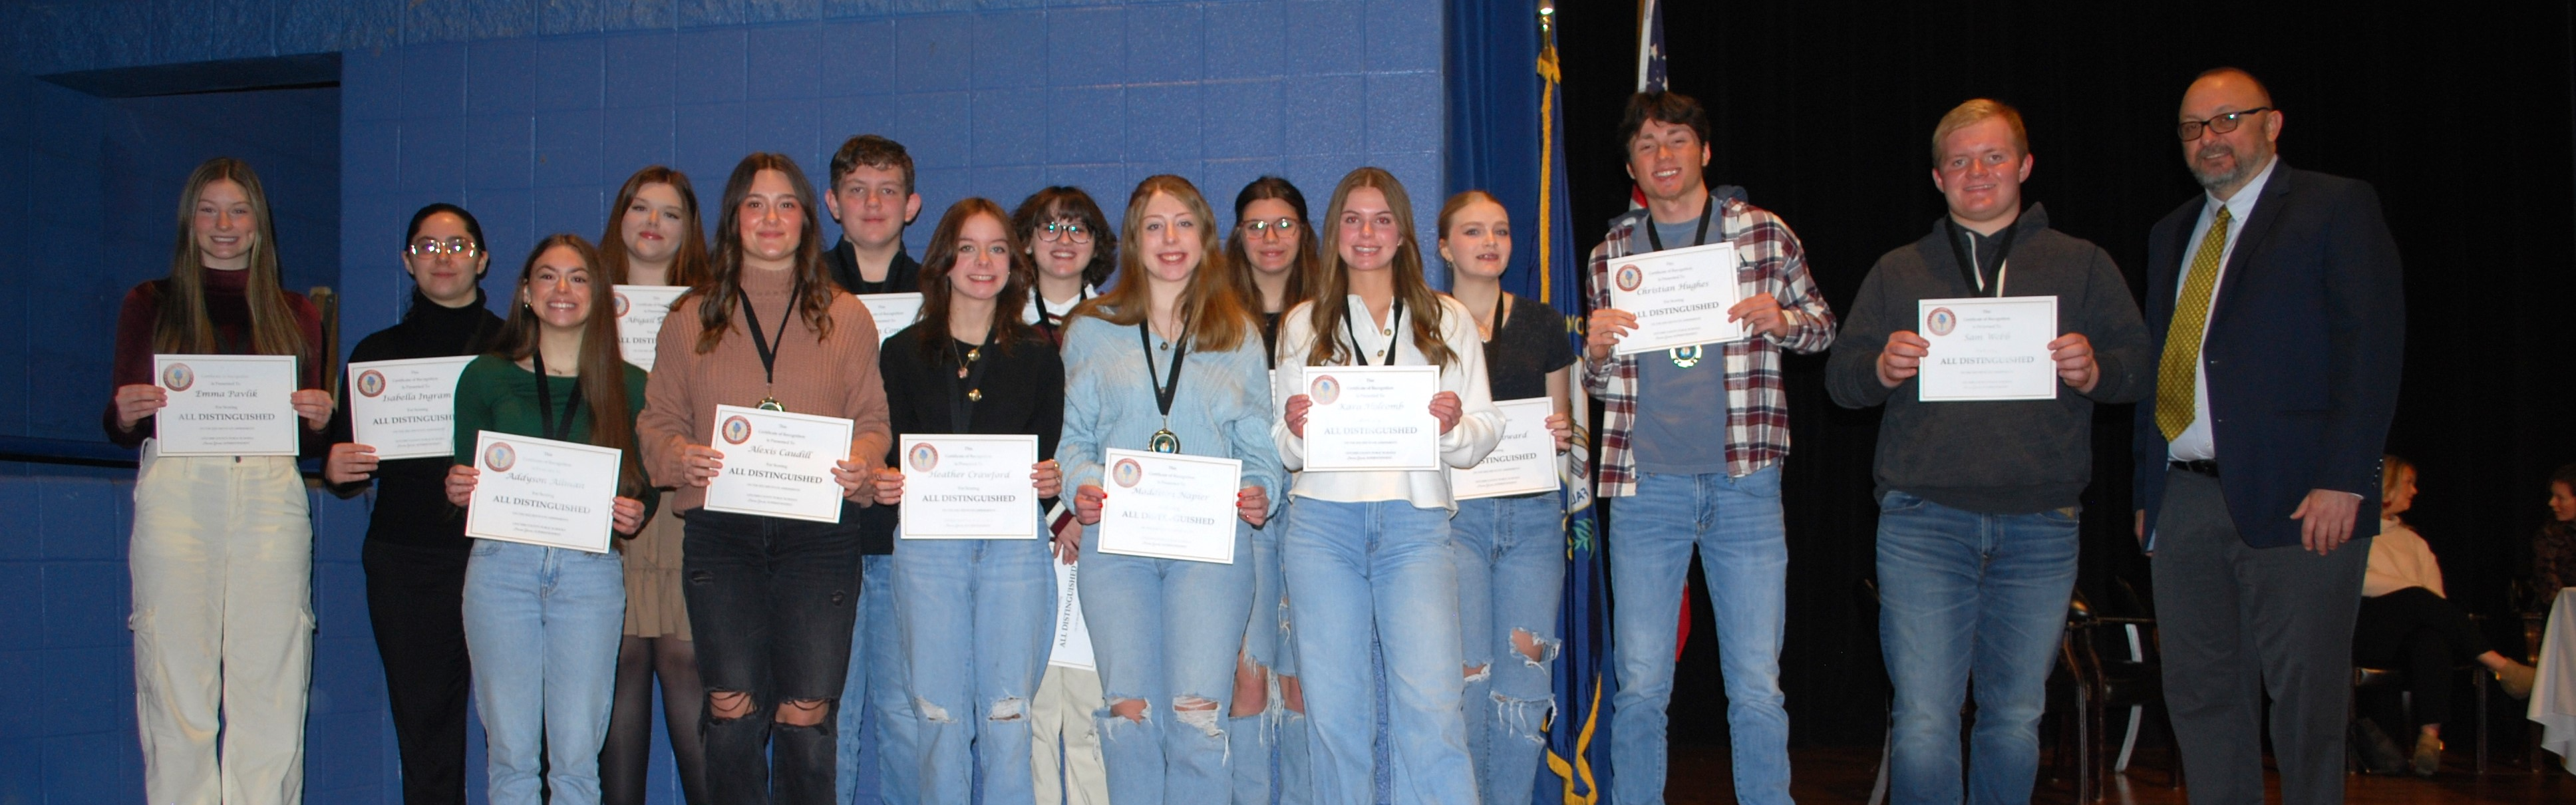 Letcher County Central students receiving all distinguished test awards.